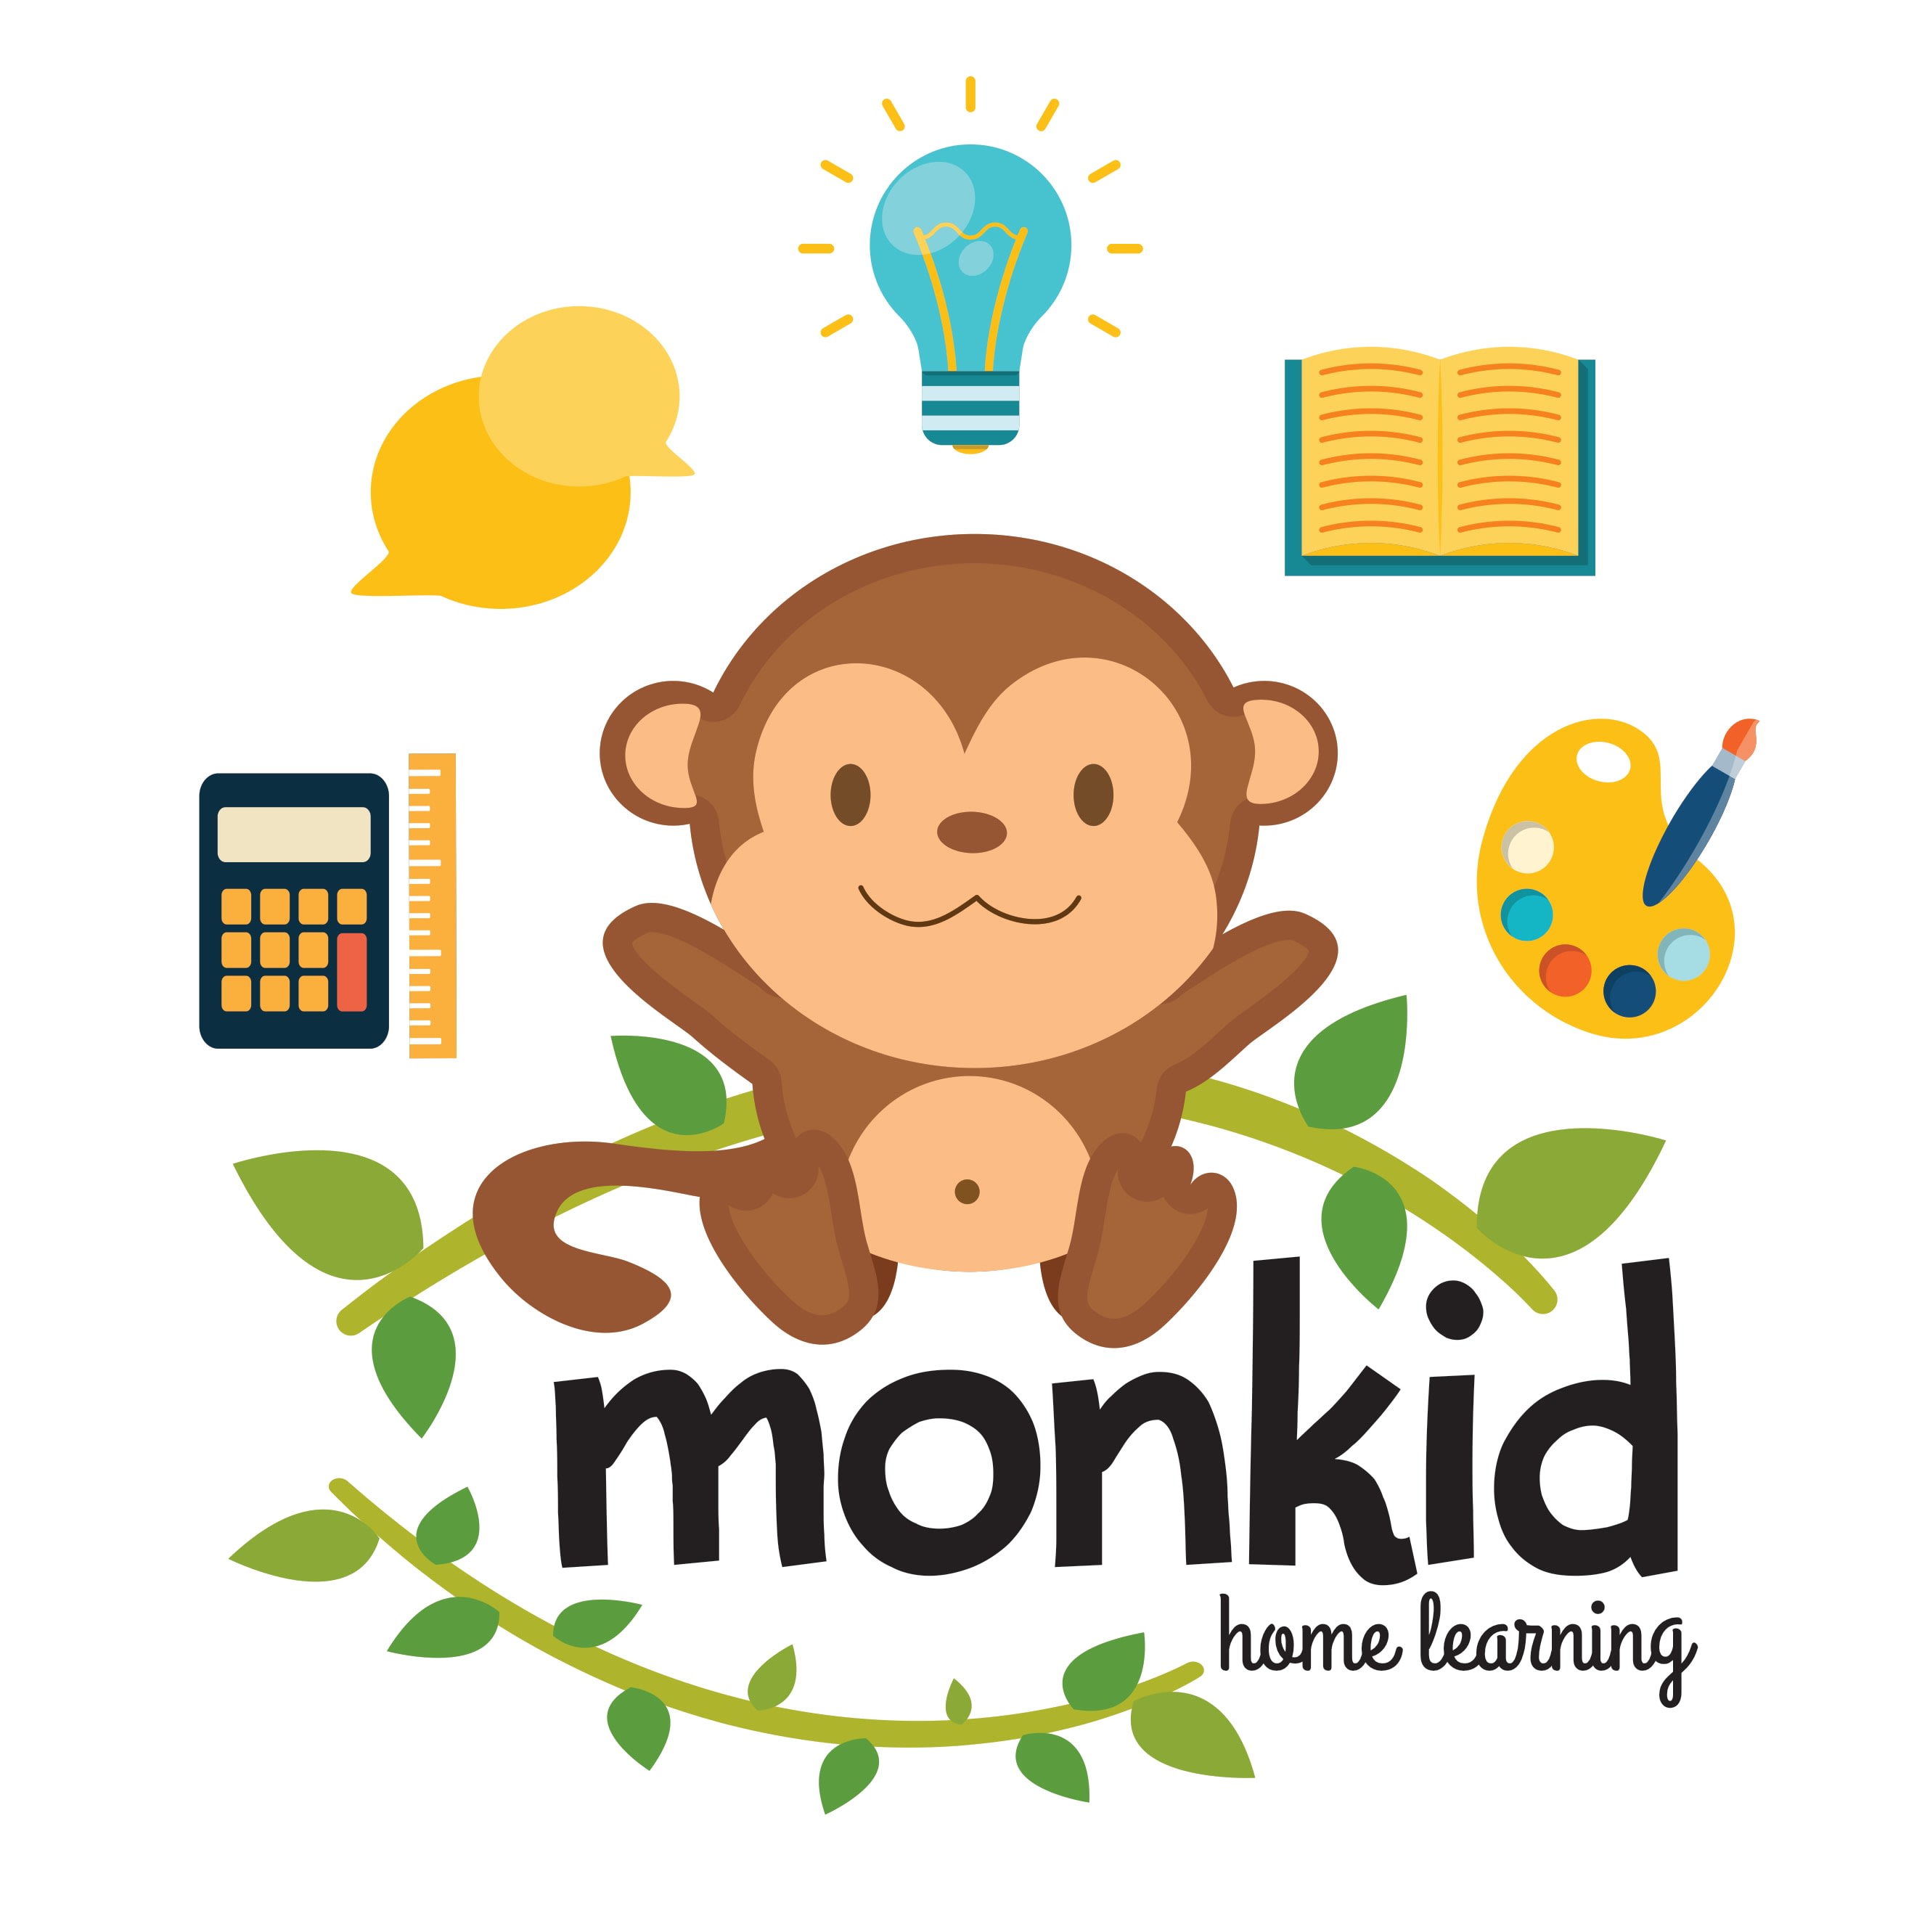 Monkid Home Learning